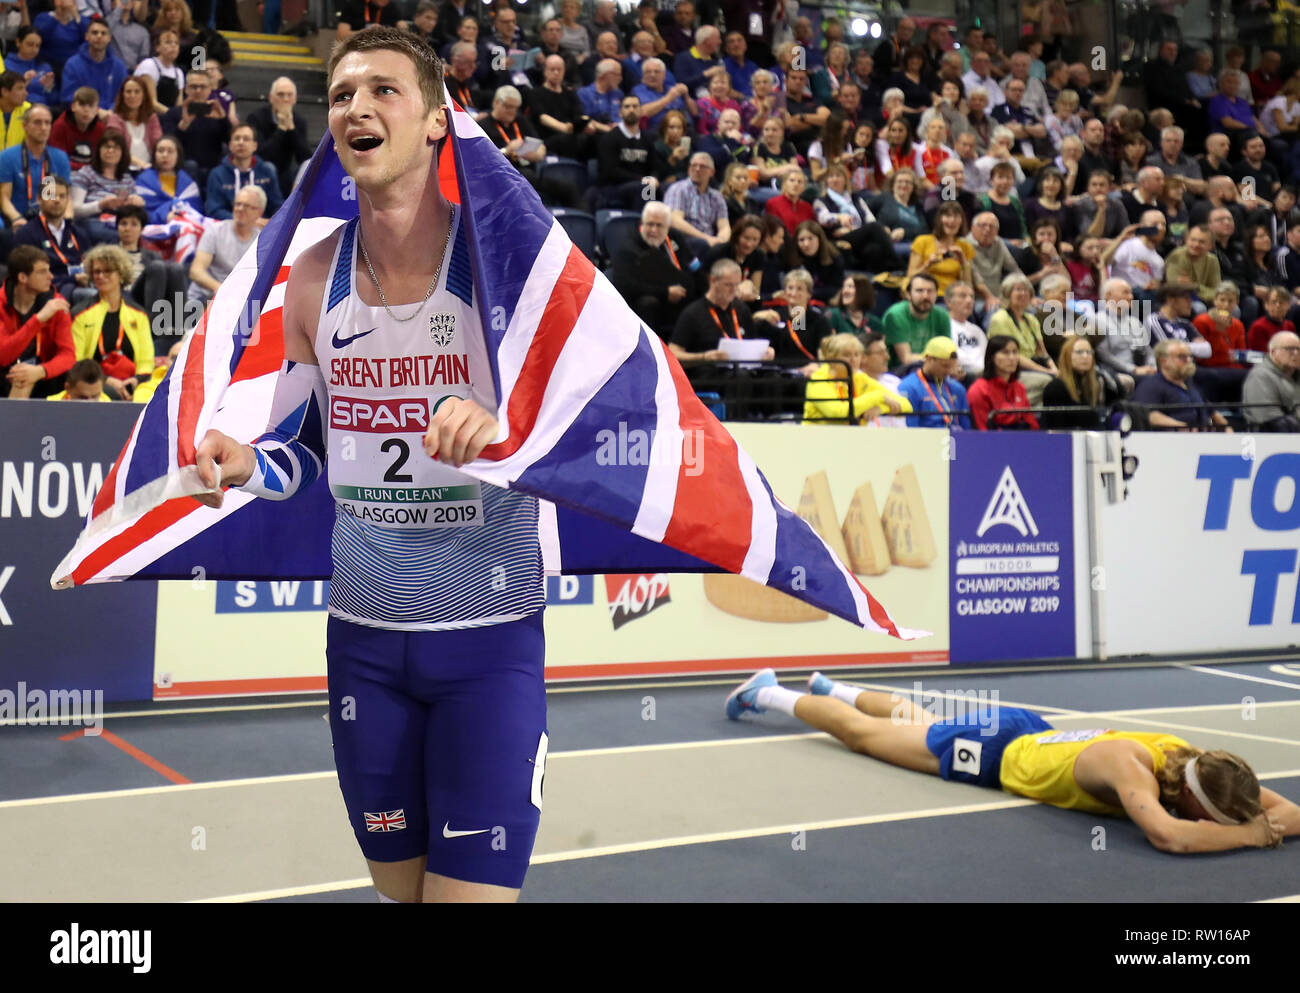 Great Britain's Tim Duckworth (left) celebrates winning silver at the Men's Heptathlon as Sweden's Fredrik Samuelsson finished fourth during day three of the European Indoor Athletics Championships at the Emirates Arena, Glasgow. Stock Photo